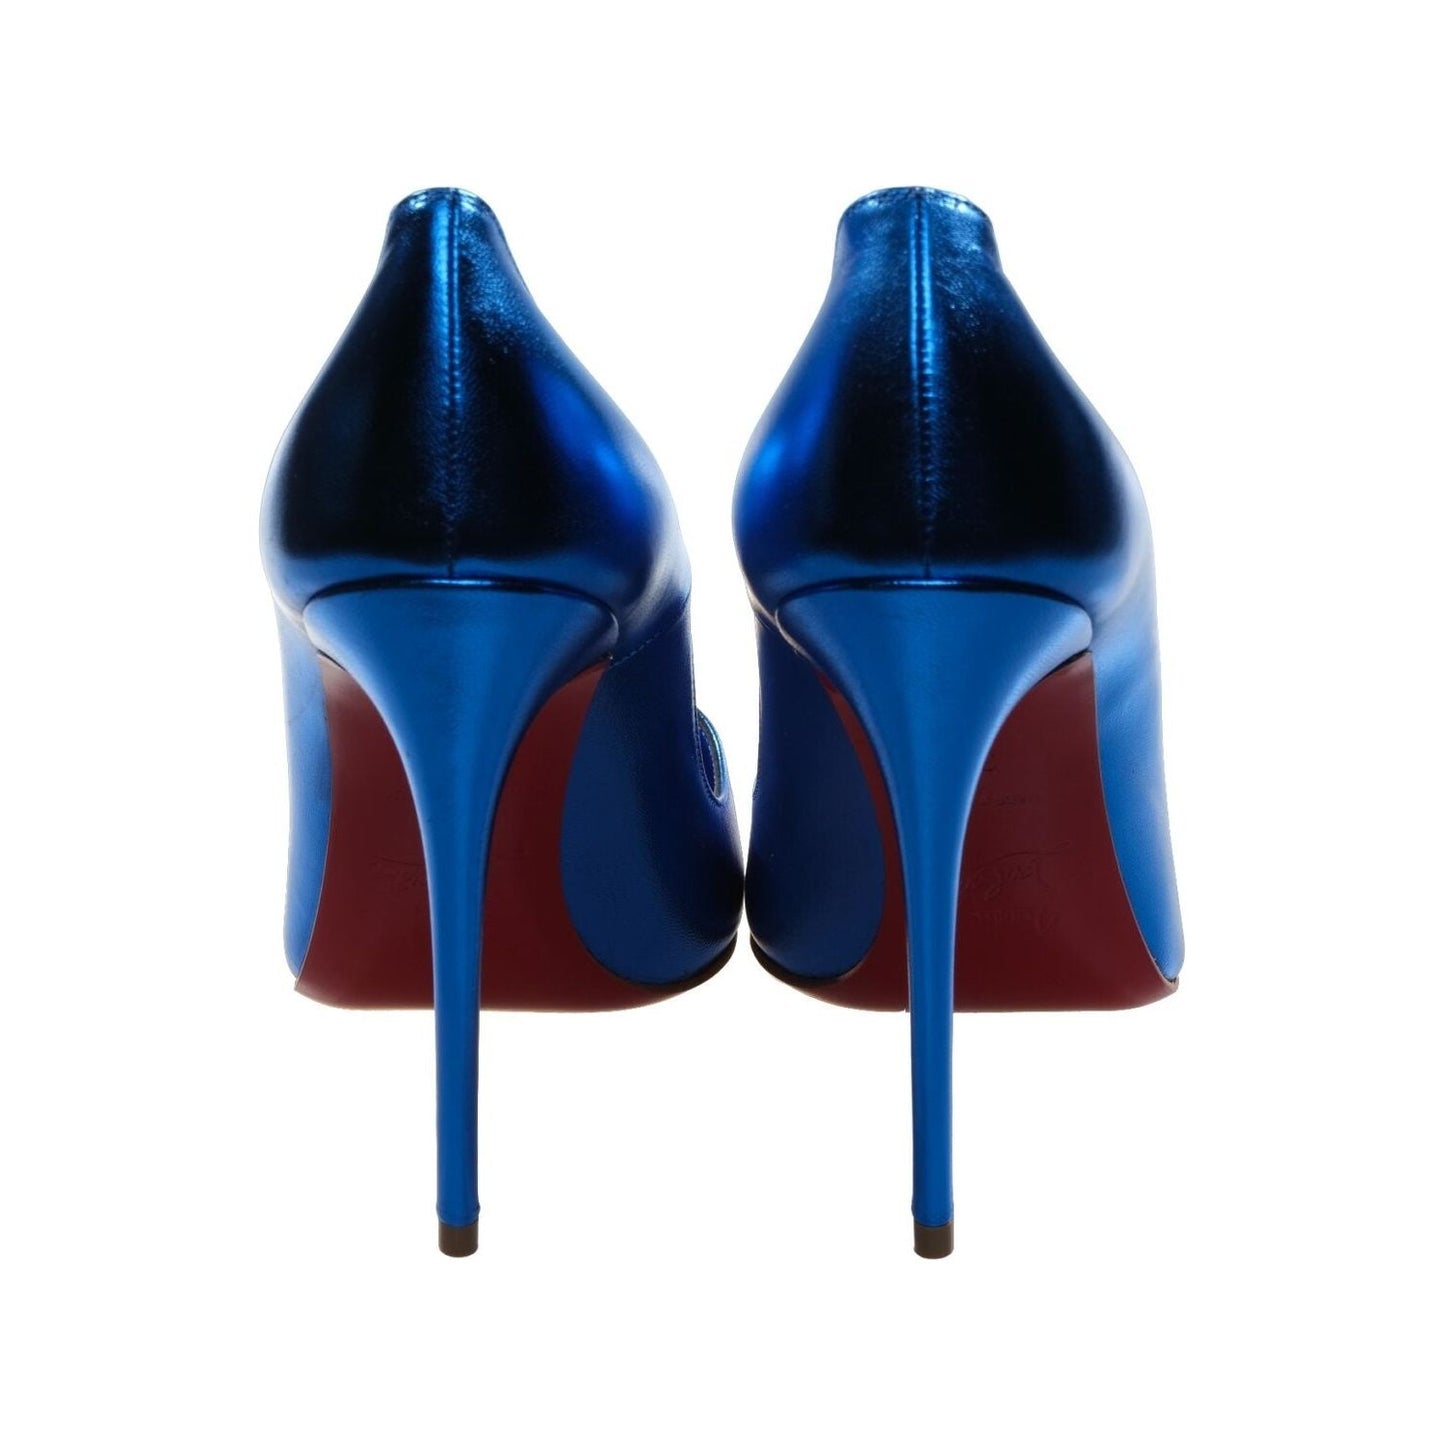 So Kate Blue Laminated Leather High Heel Pumps